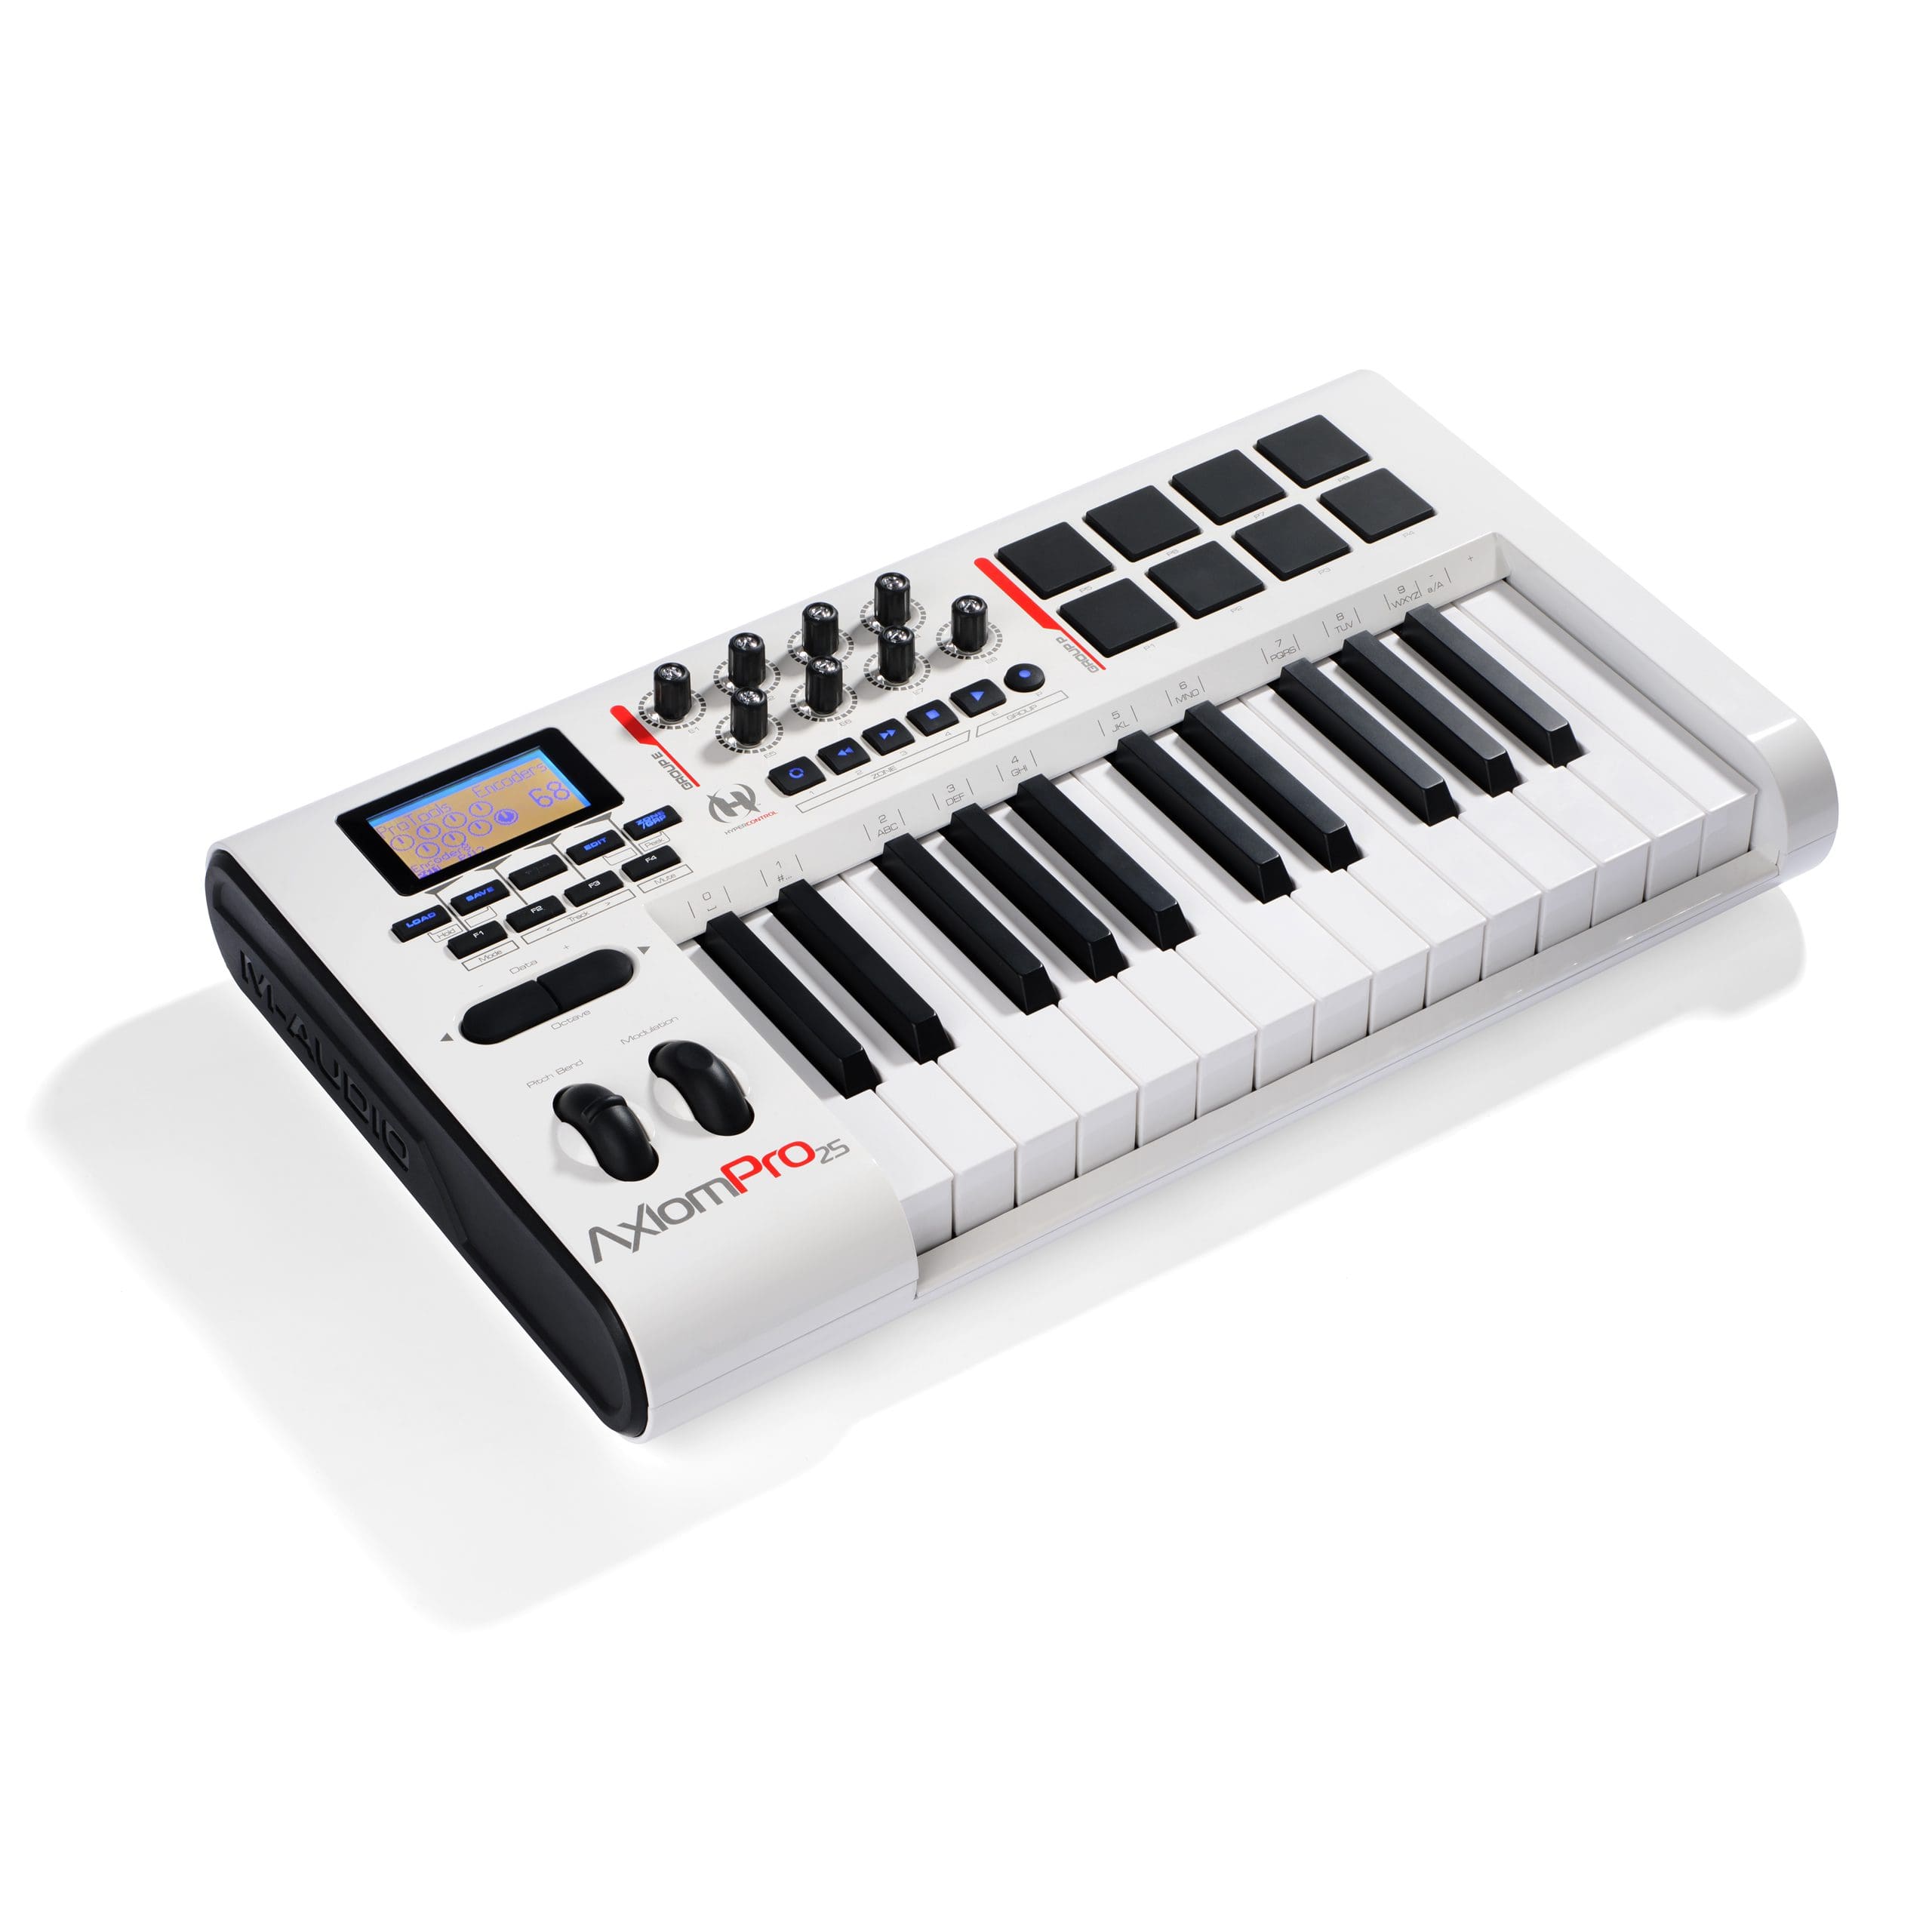 A product photo of a digital keyboard on a white background featured on our product photography pricing page.